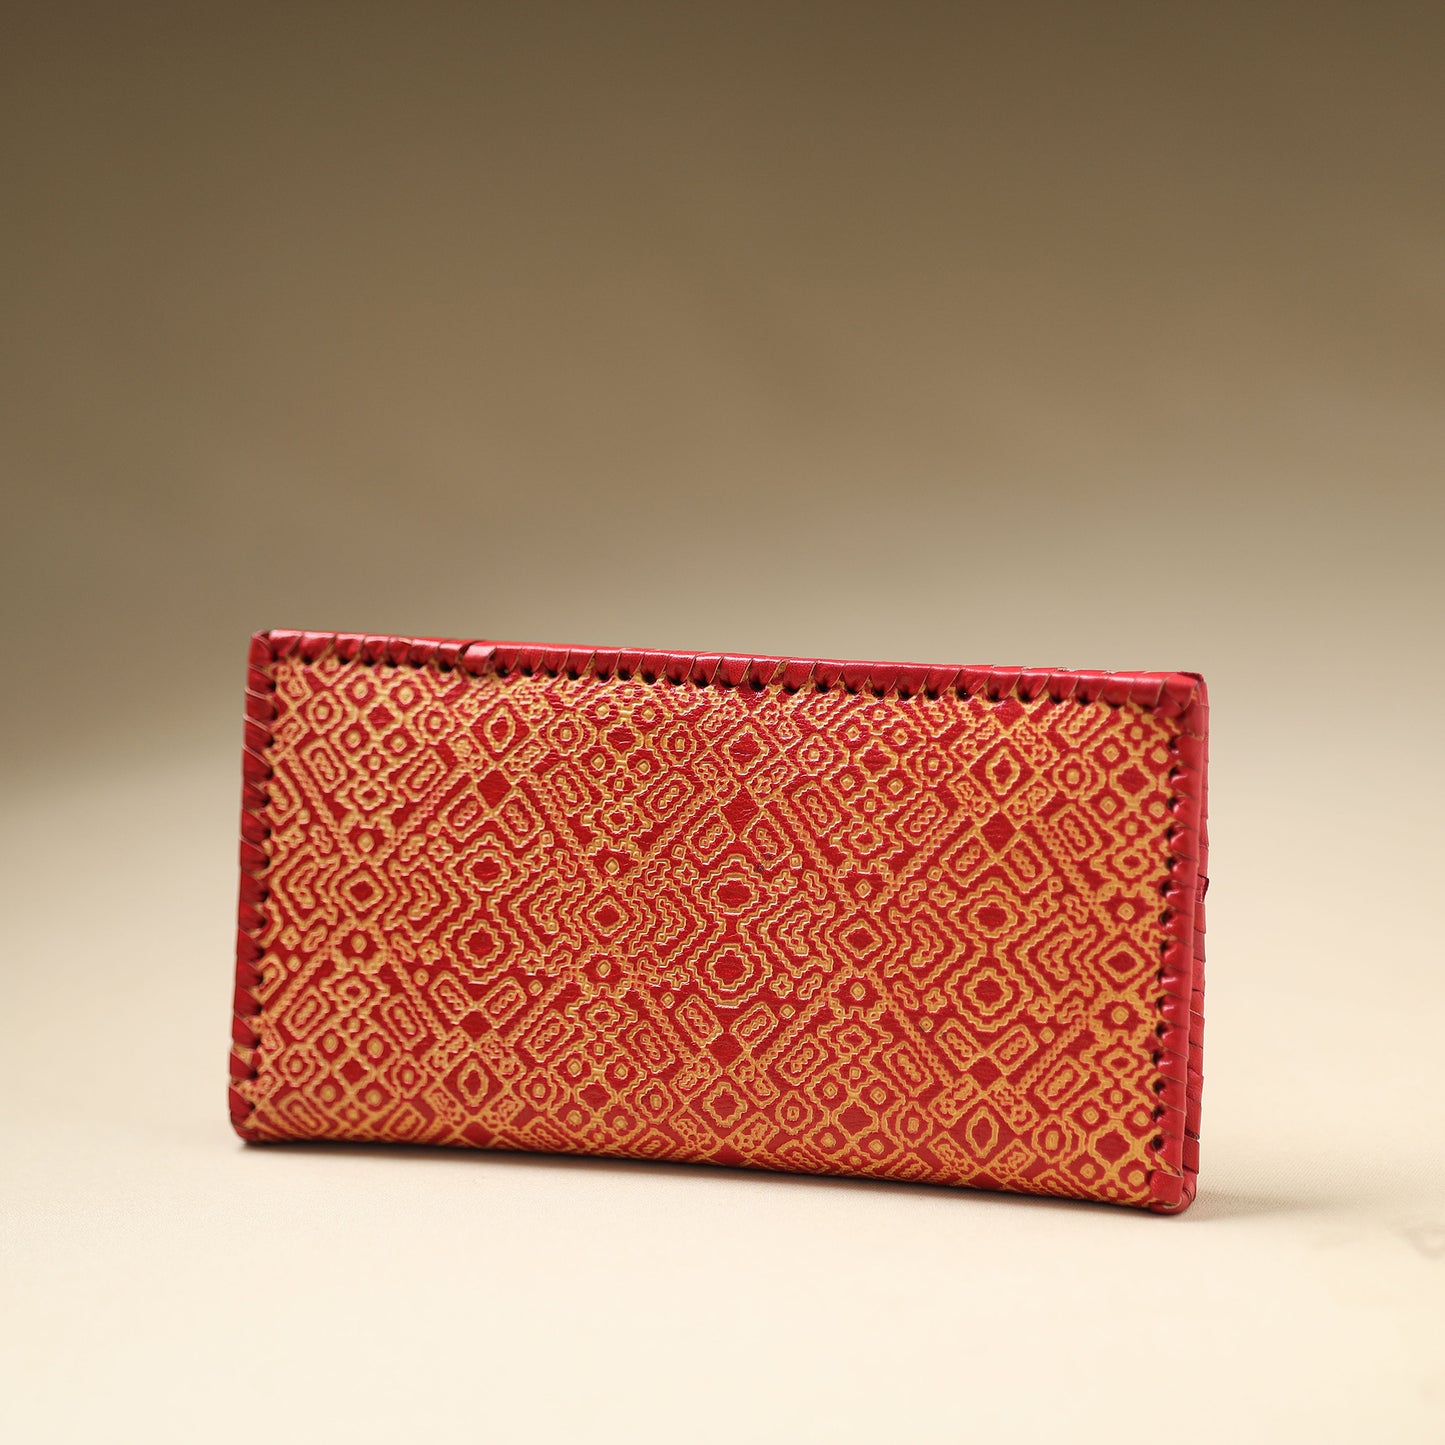 Handcrafted Embossed Leather Wallet